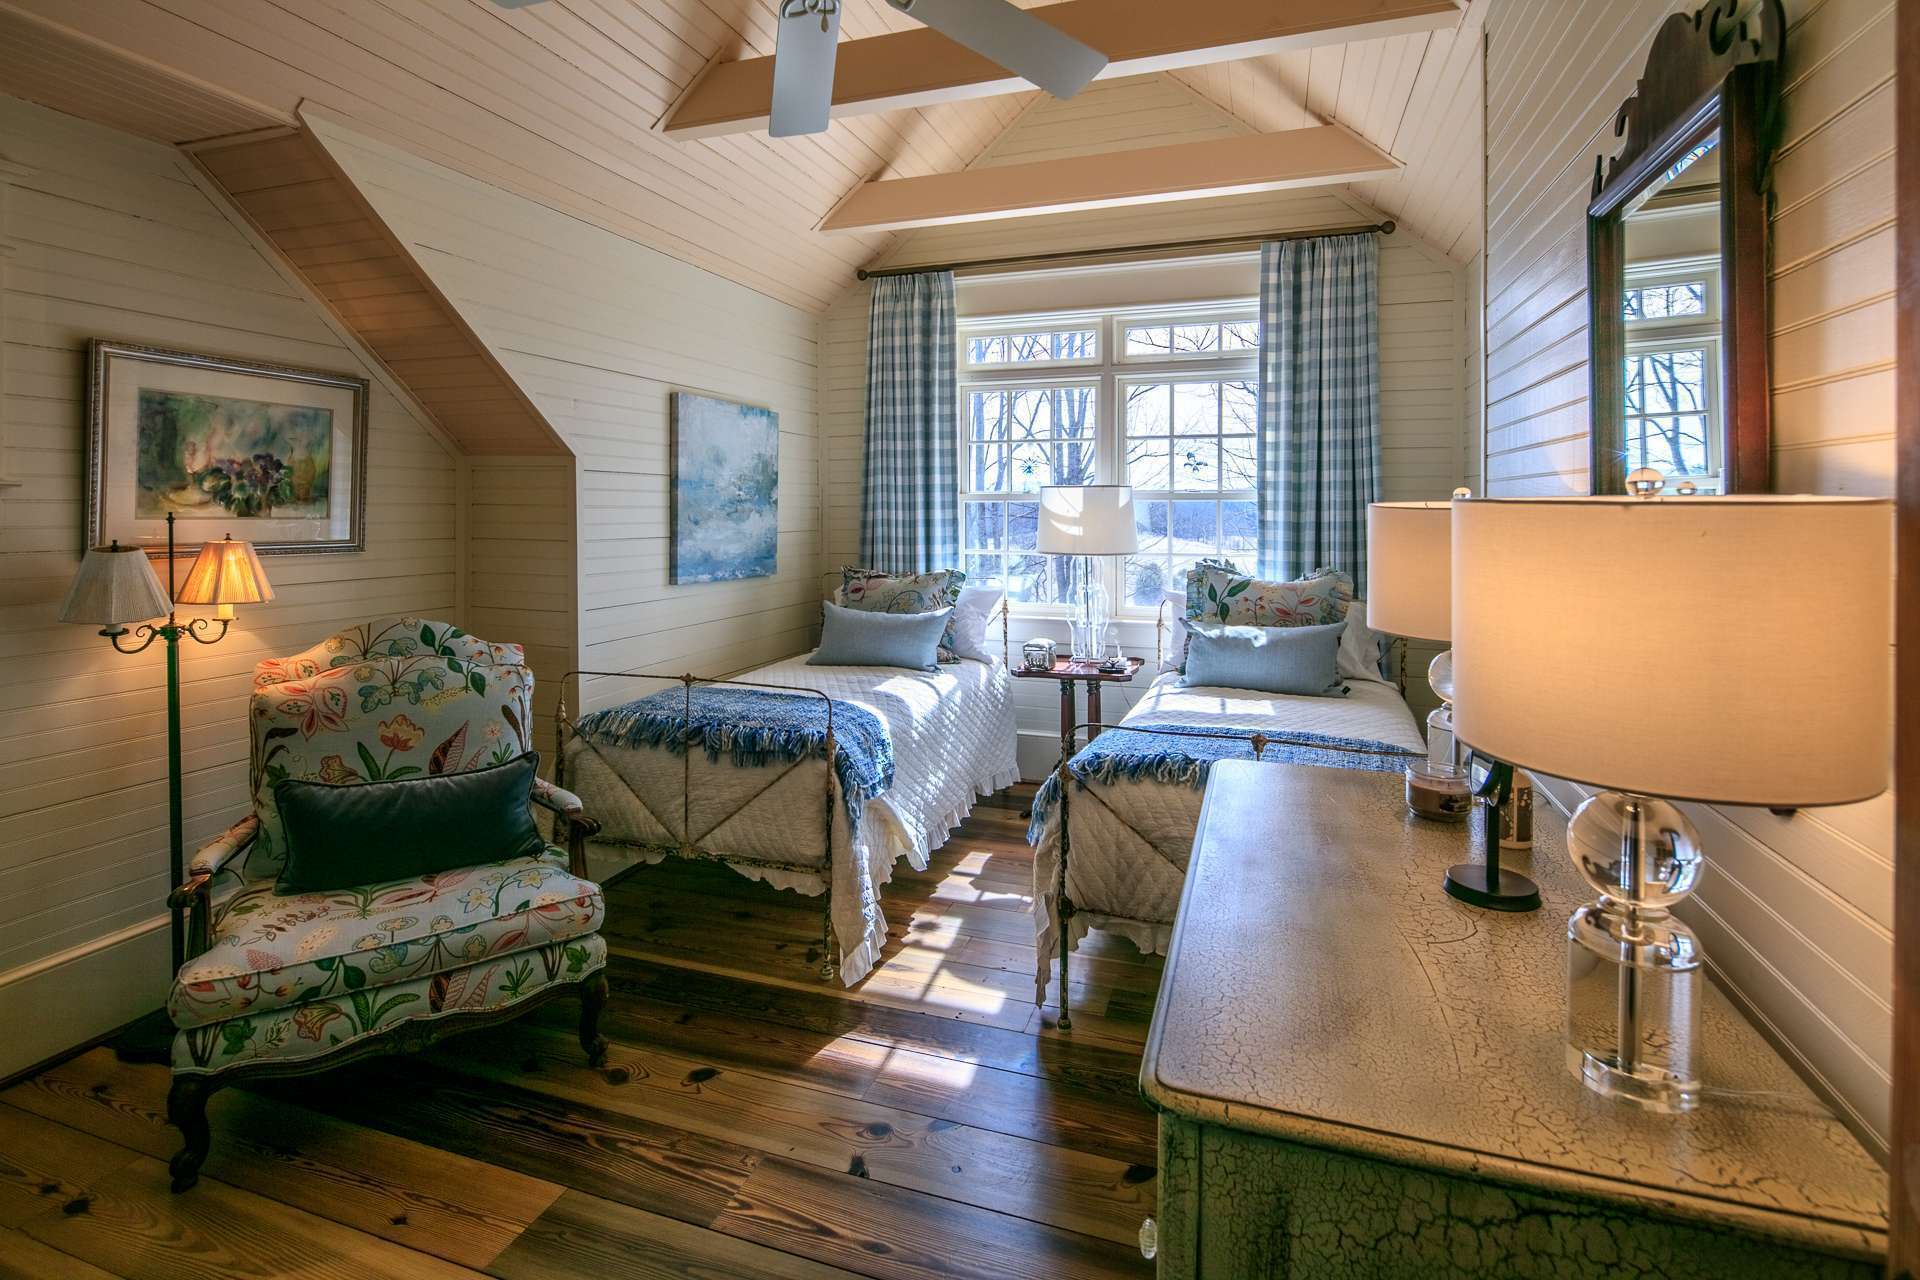 The second upper level bedroom is also full of homespun character and architectural accents.